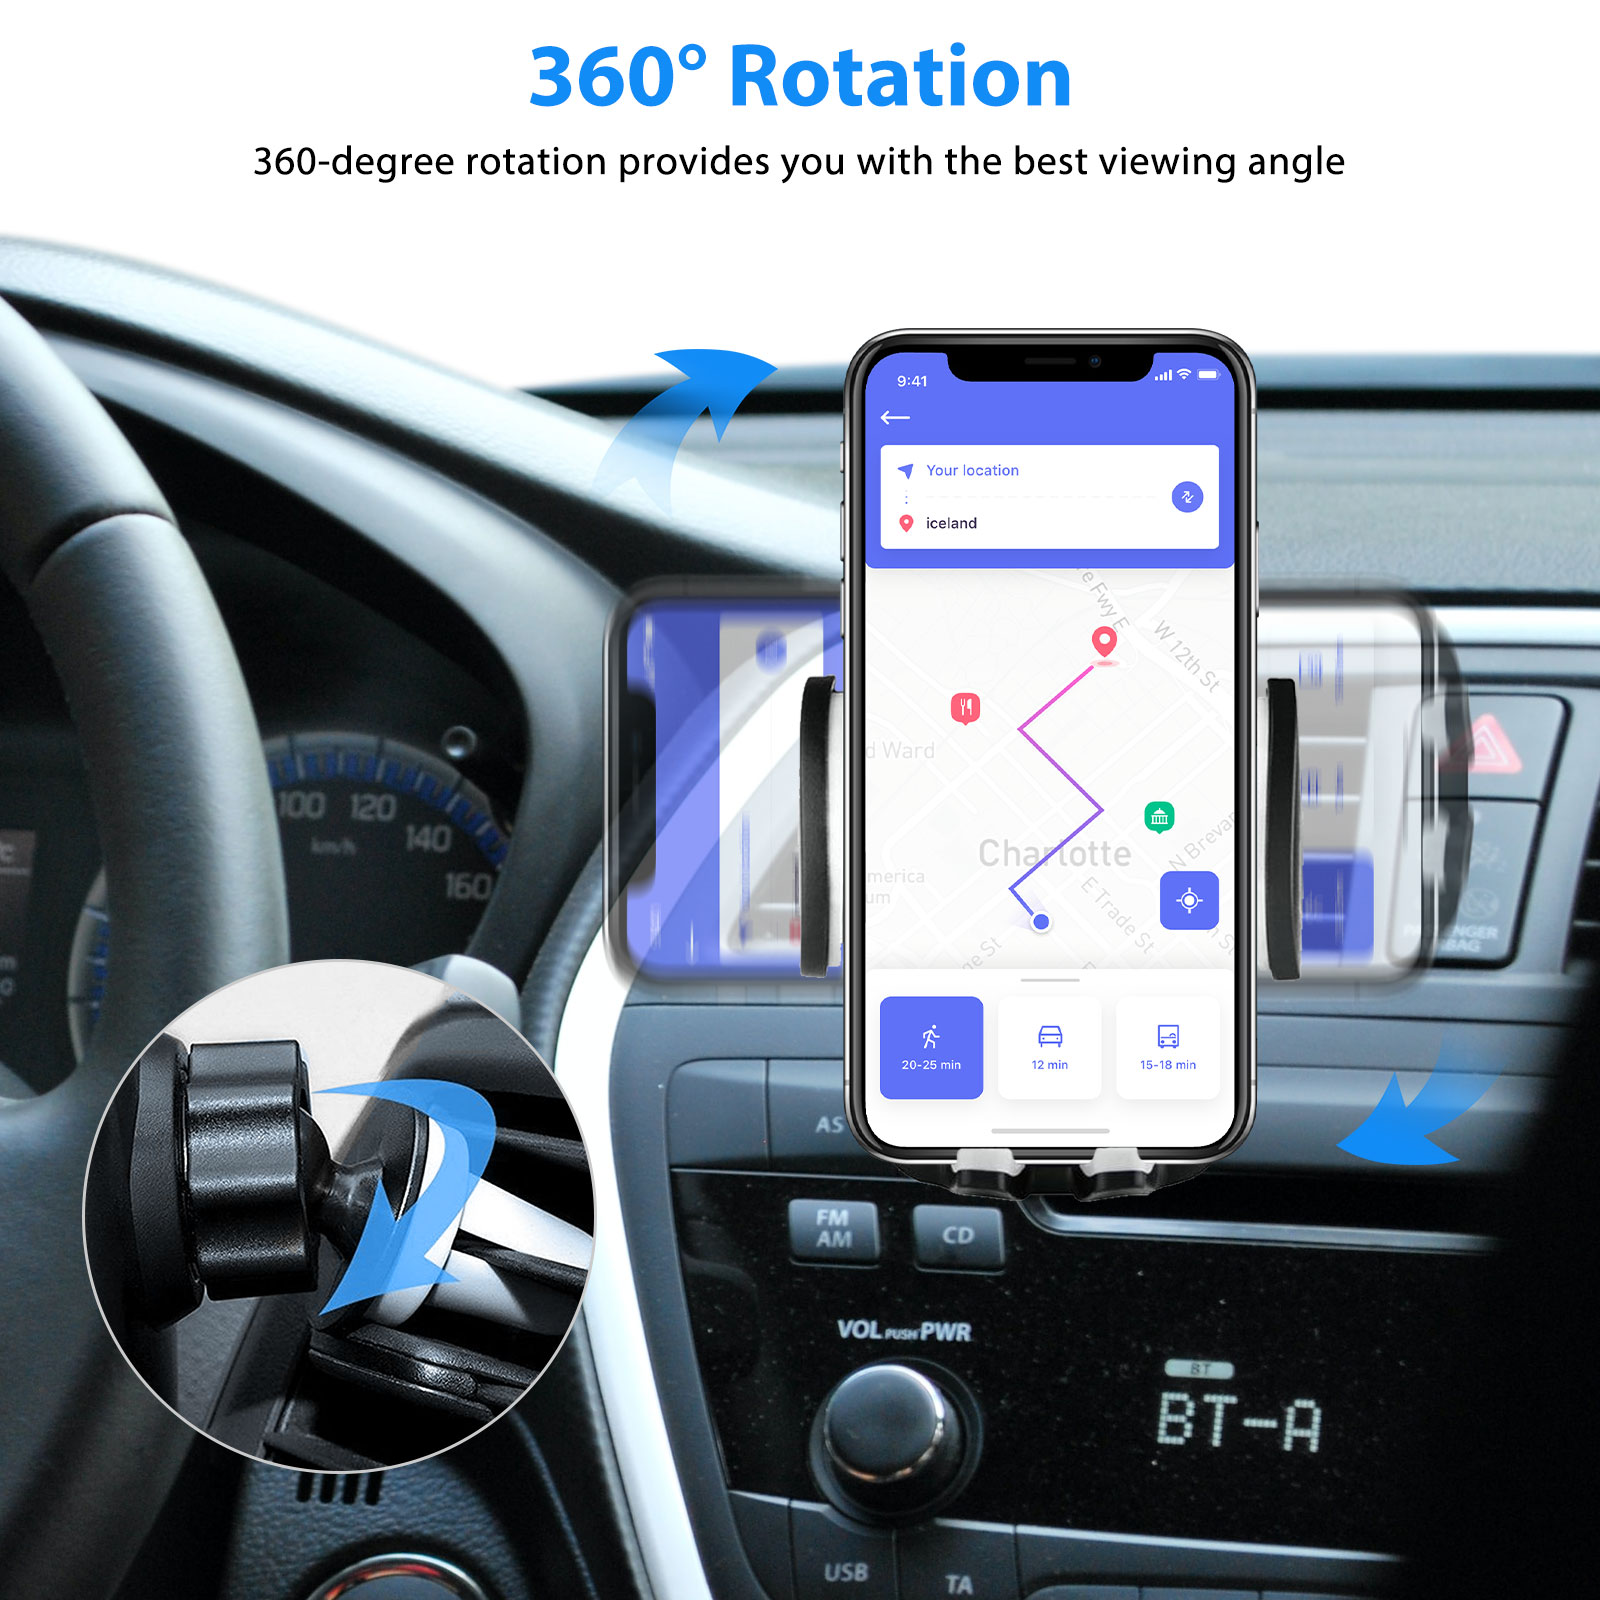 Car Mount, Air Vent Car Holder, Car Phone Mount Fit for iPhone 13, 12, 12 Pro, 12 Pro Max, 11 XS X 8, Android Cell Phones, Phone Holder for Car, Universal Air Vent Mount for Men Women - image 3 of 9